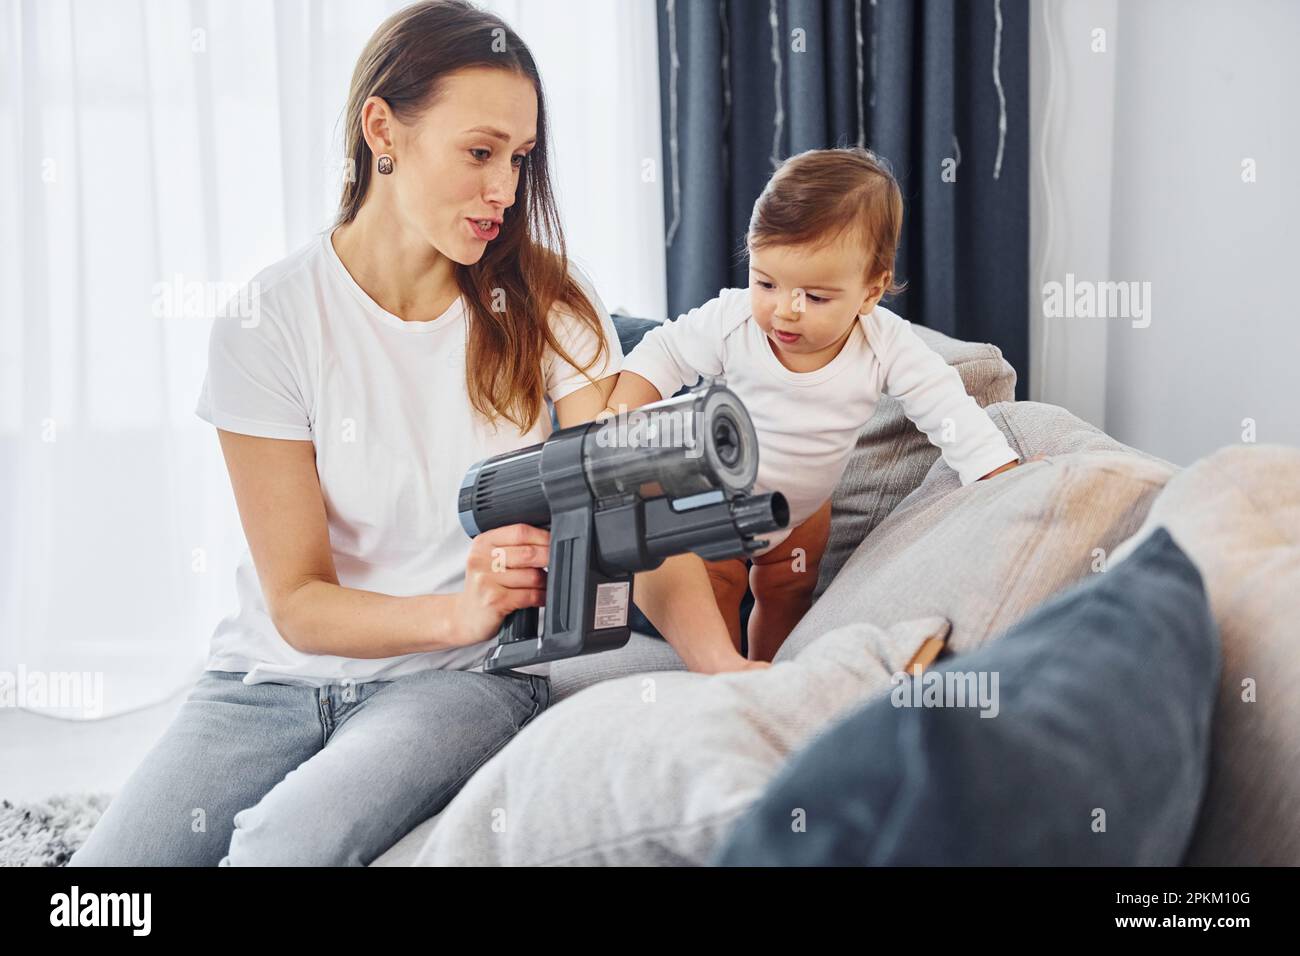 Little part of the vacuum cleaner. Mother with her little daughter is indoors at home together. Stock Photo